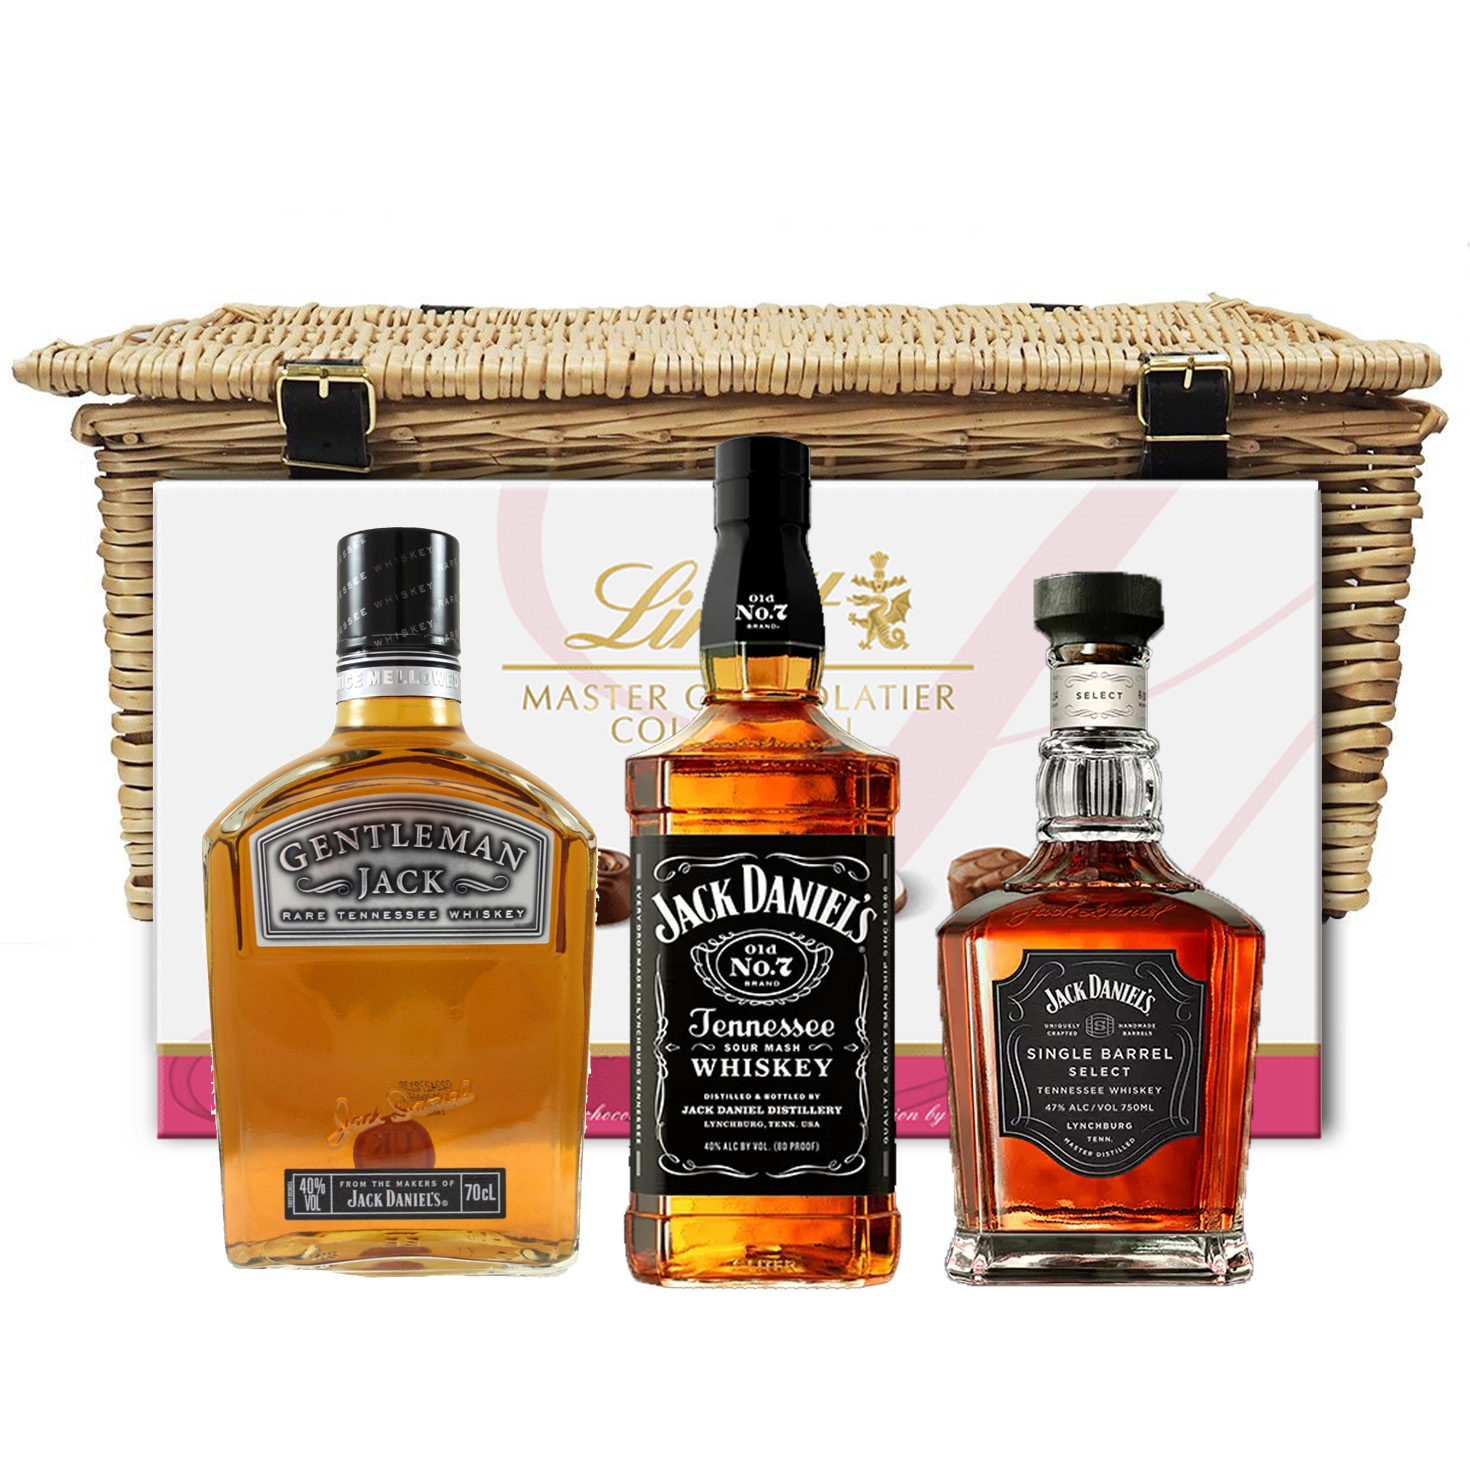 The Jack Daniels Family, Buy online for UK nationwide delivery